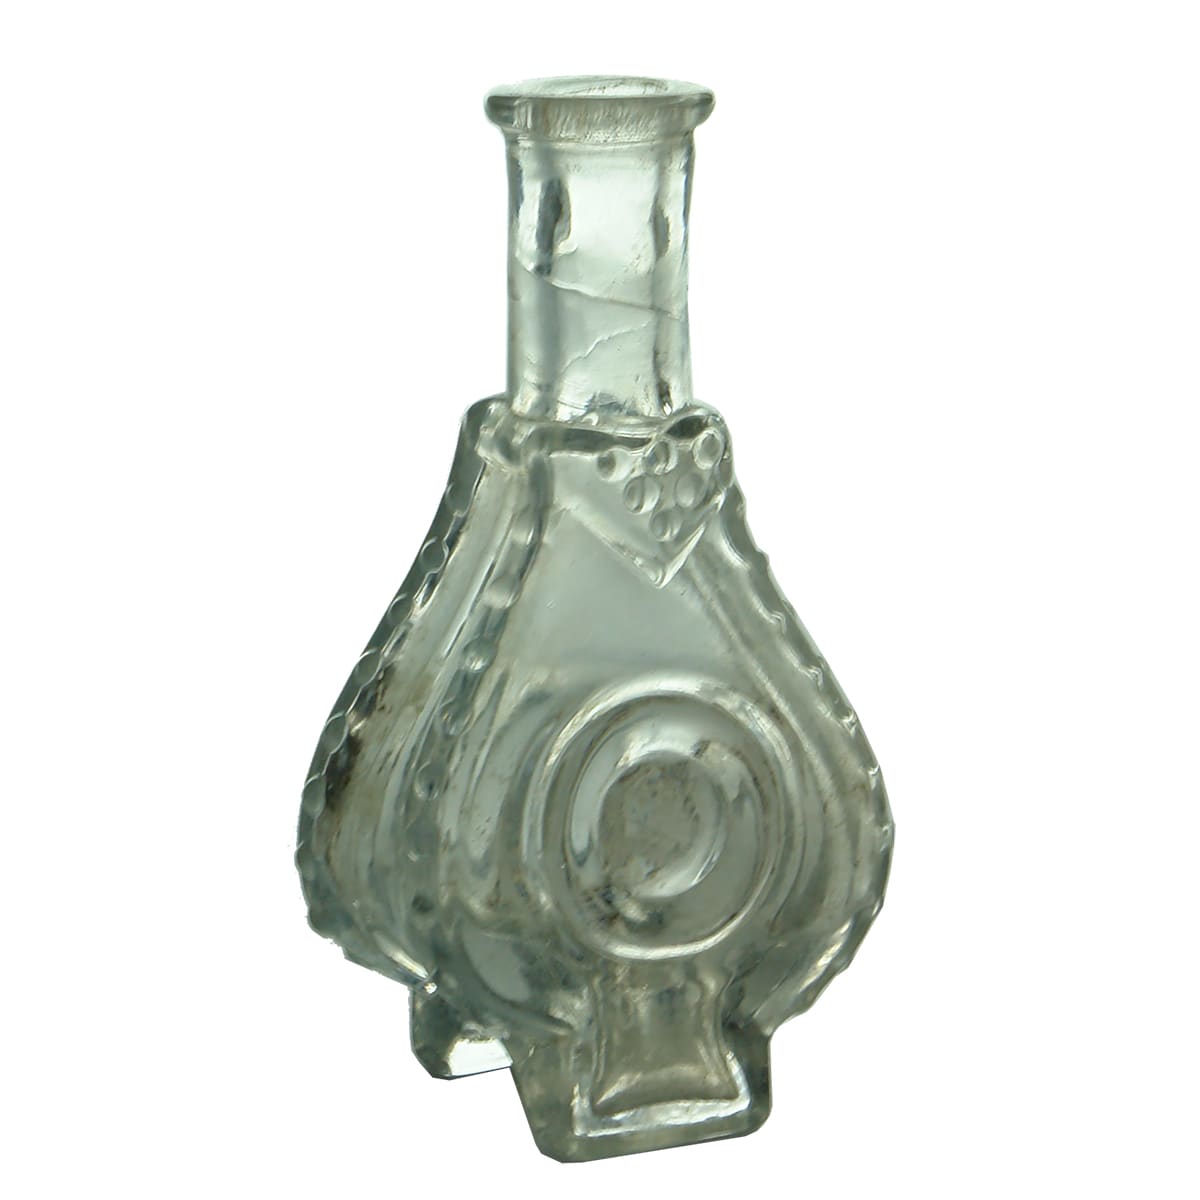 Bellows shaped Perfume or similar. Clear. 1-2 oz. (James Lewis)